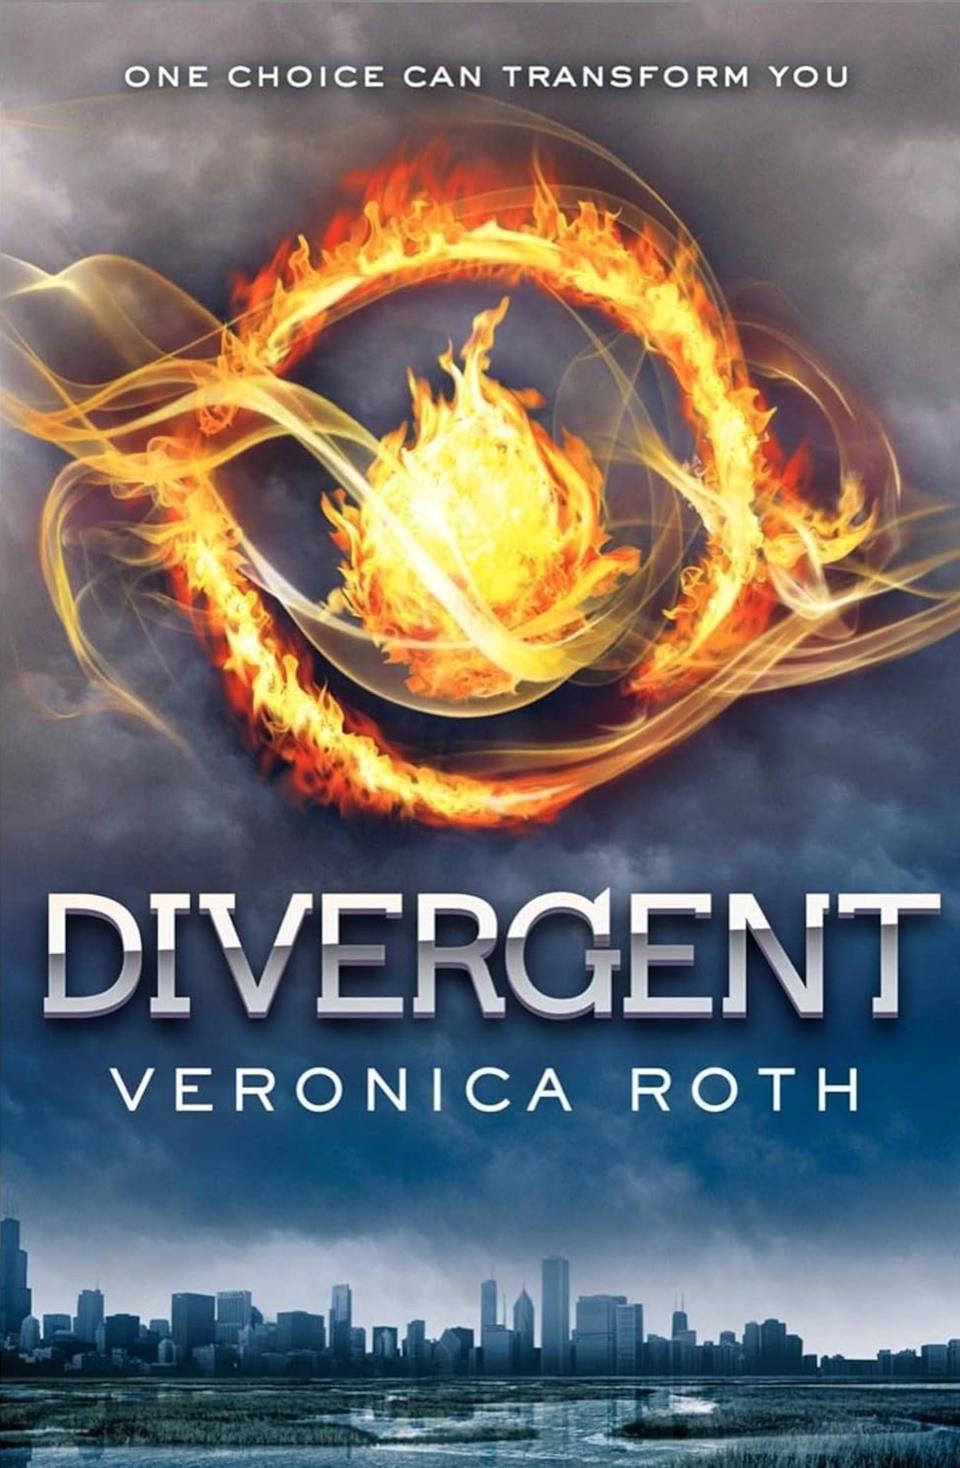 The cover of "Divergent" by Veronica Roth.